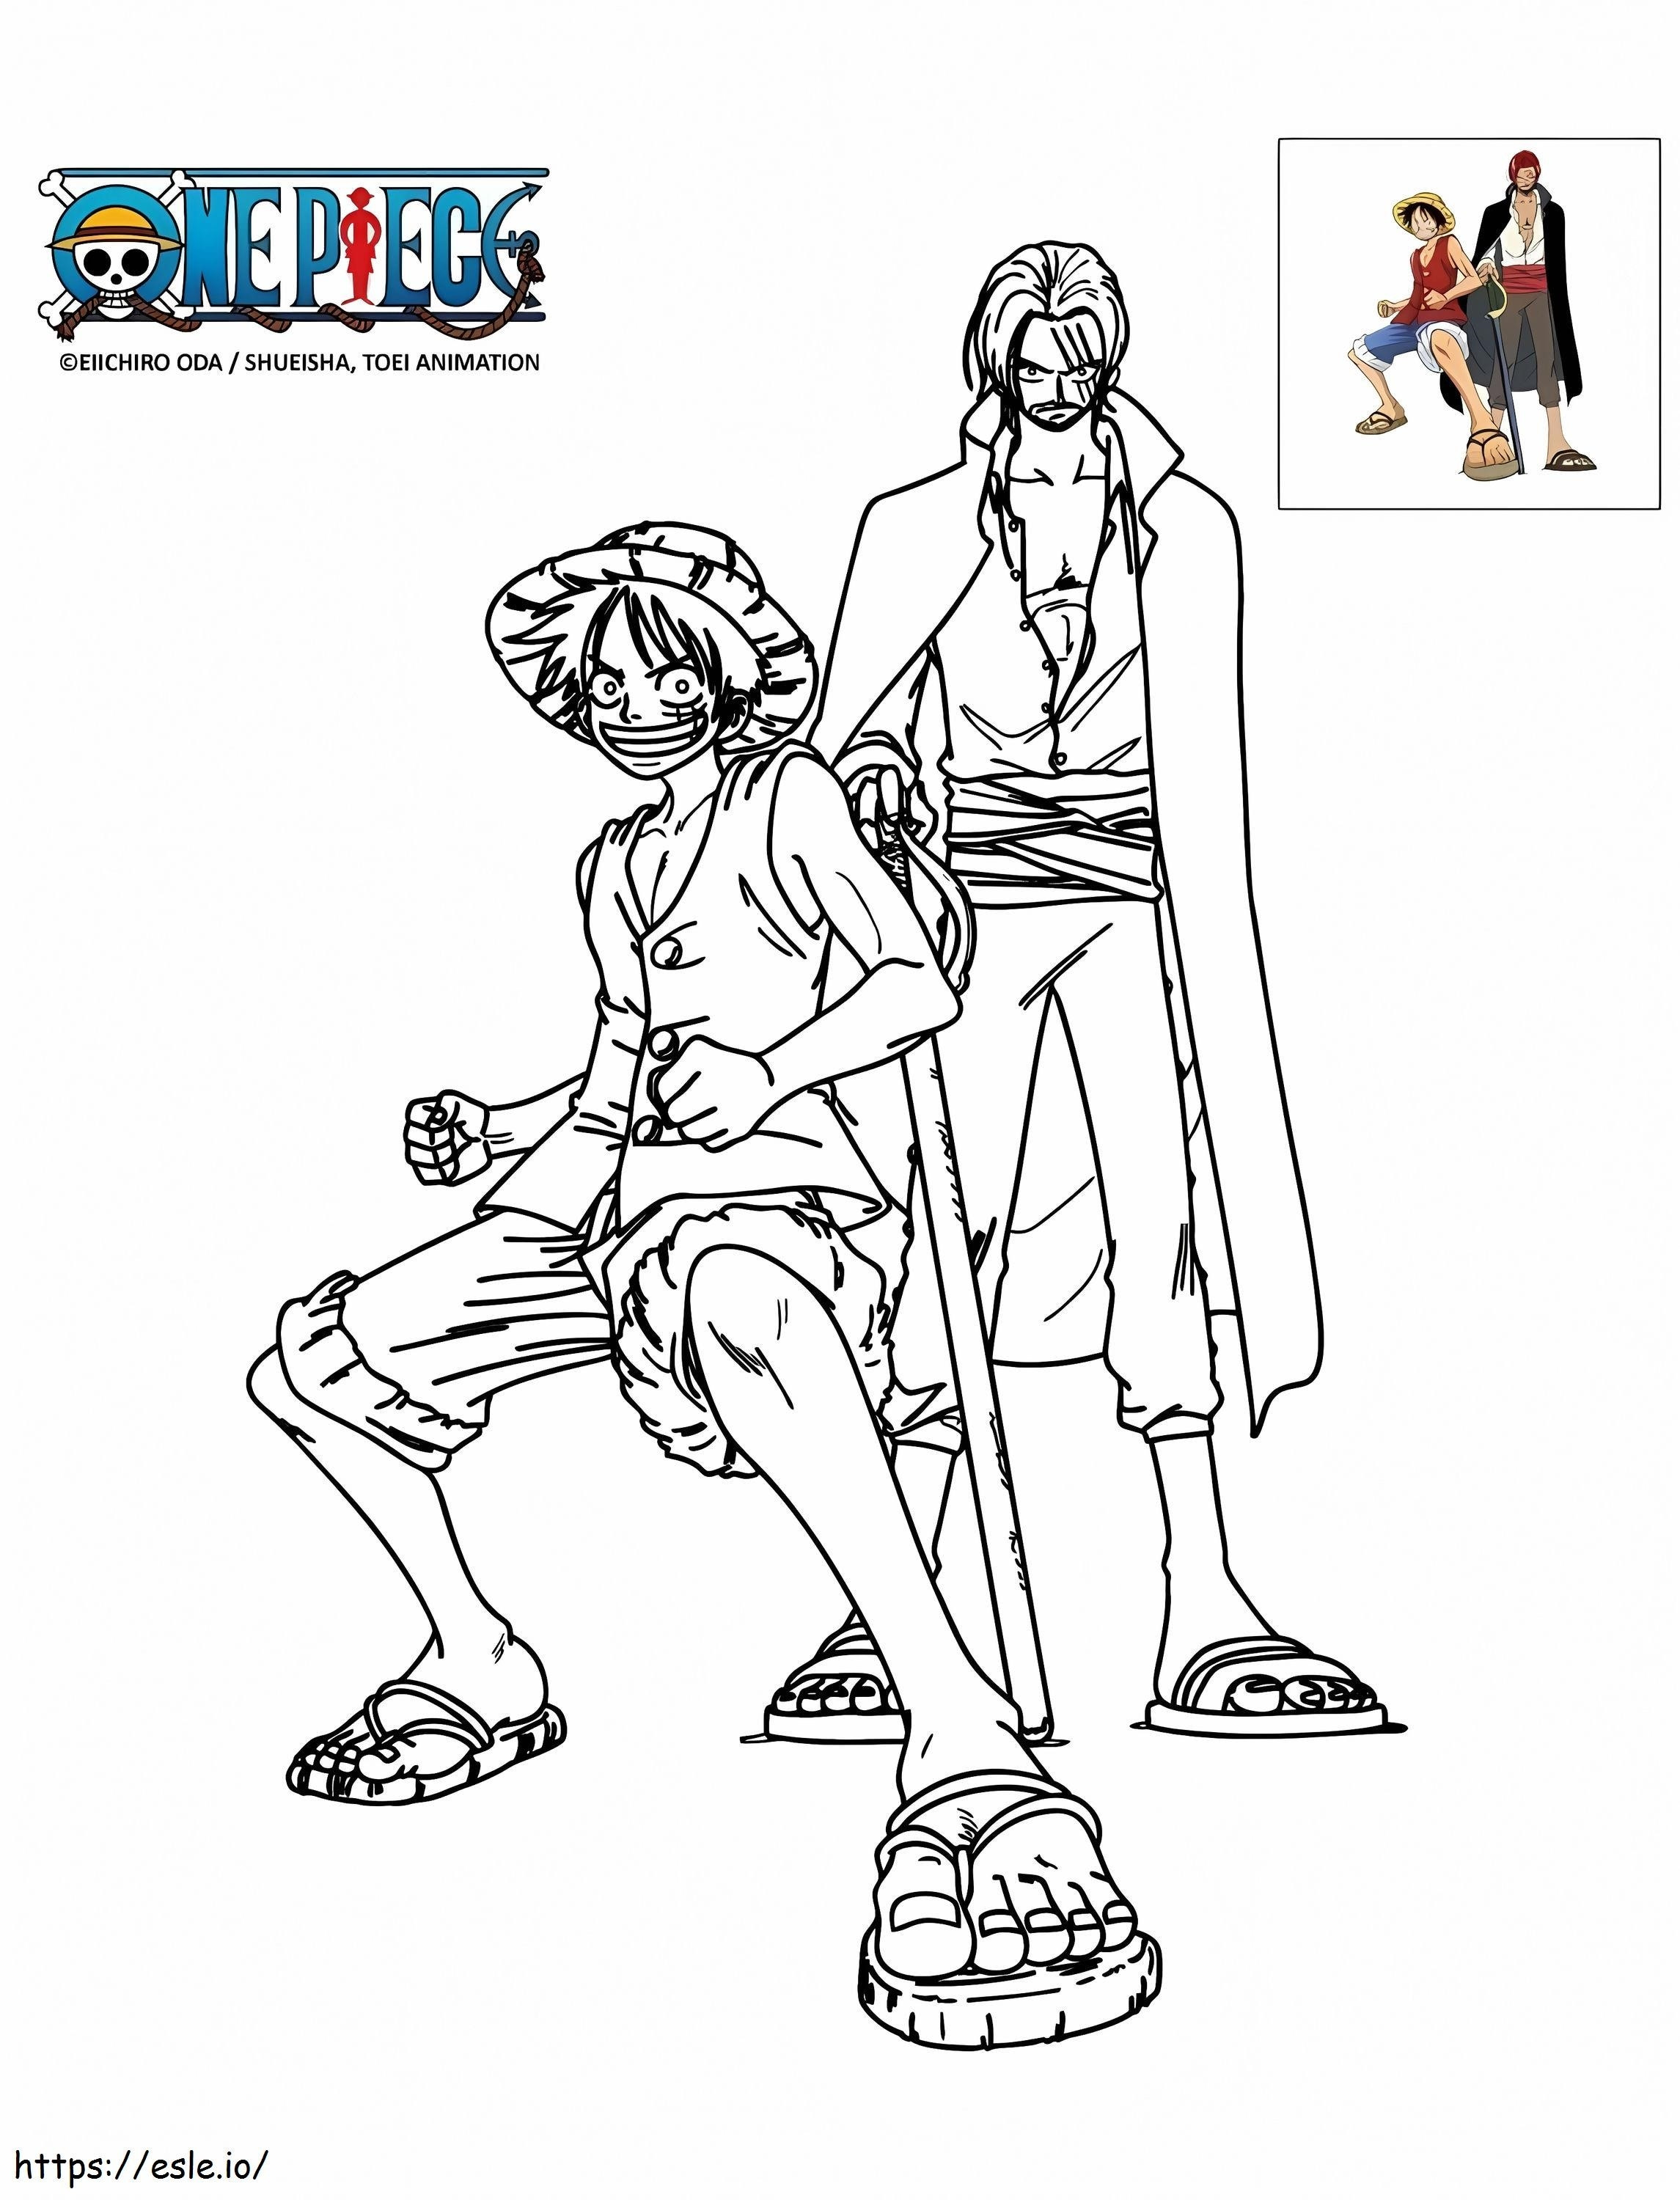 For Children One Piece 69270 coloring page